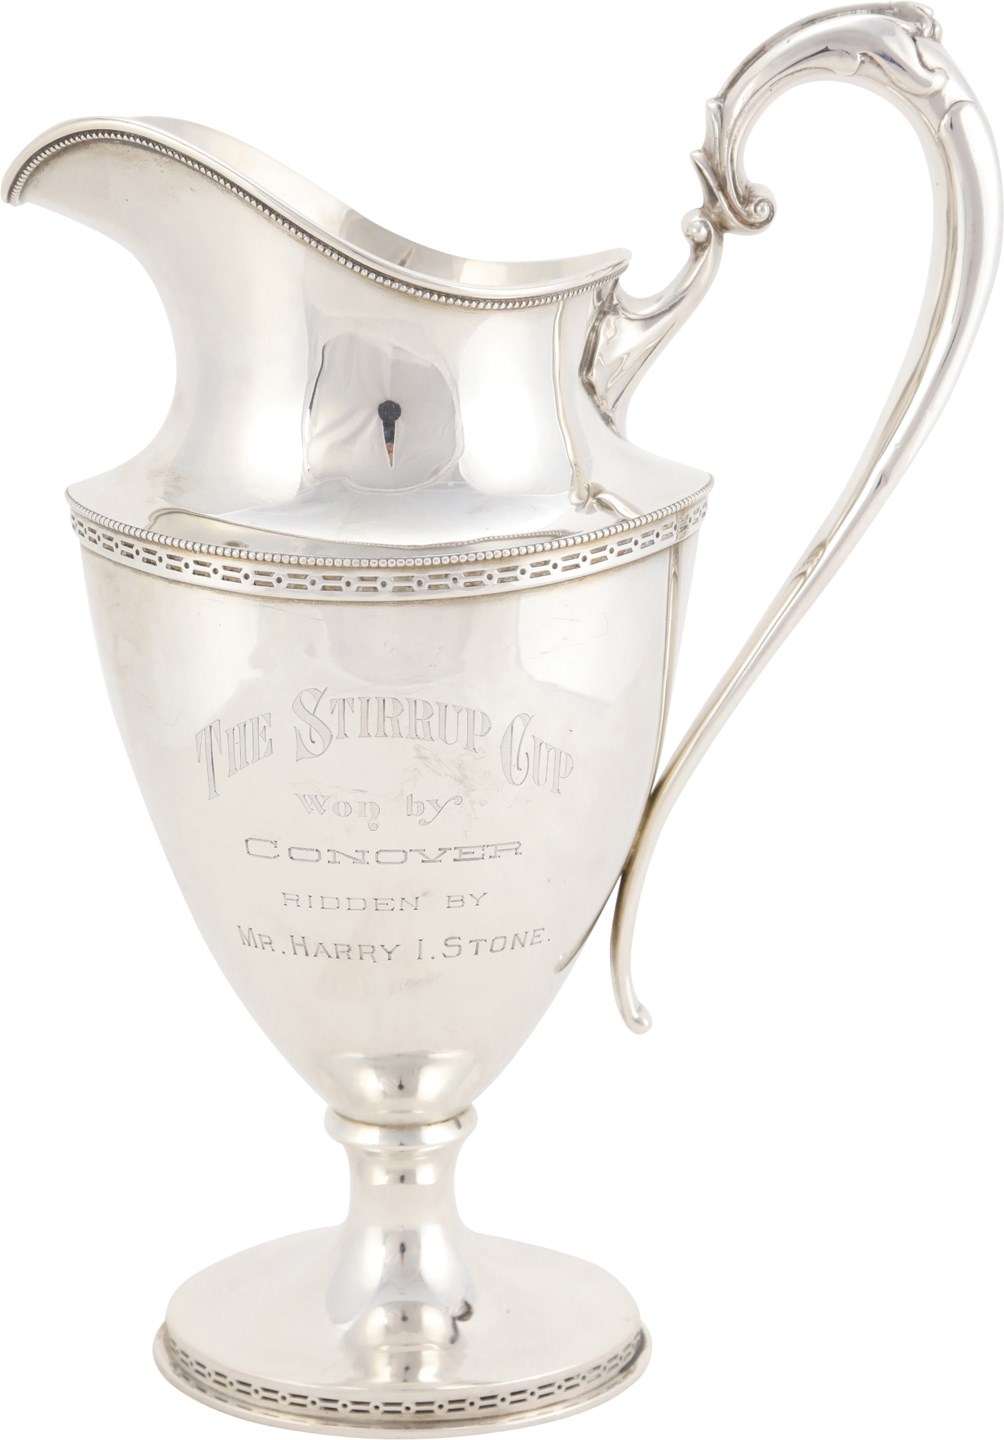 - Historic 1904 Sterling Silver Trophy from the Coney Island Jockey Club